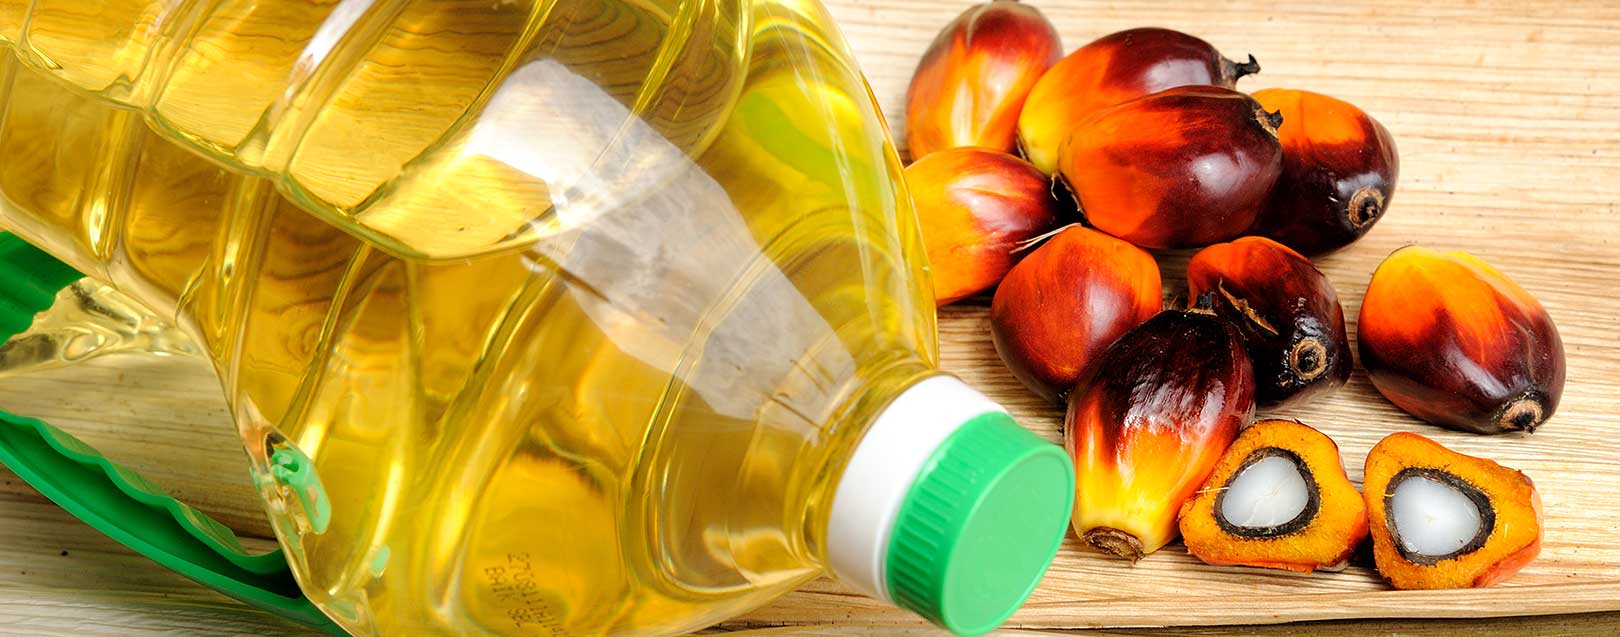 India’s edible oil imports to increase by 15-20%